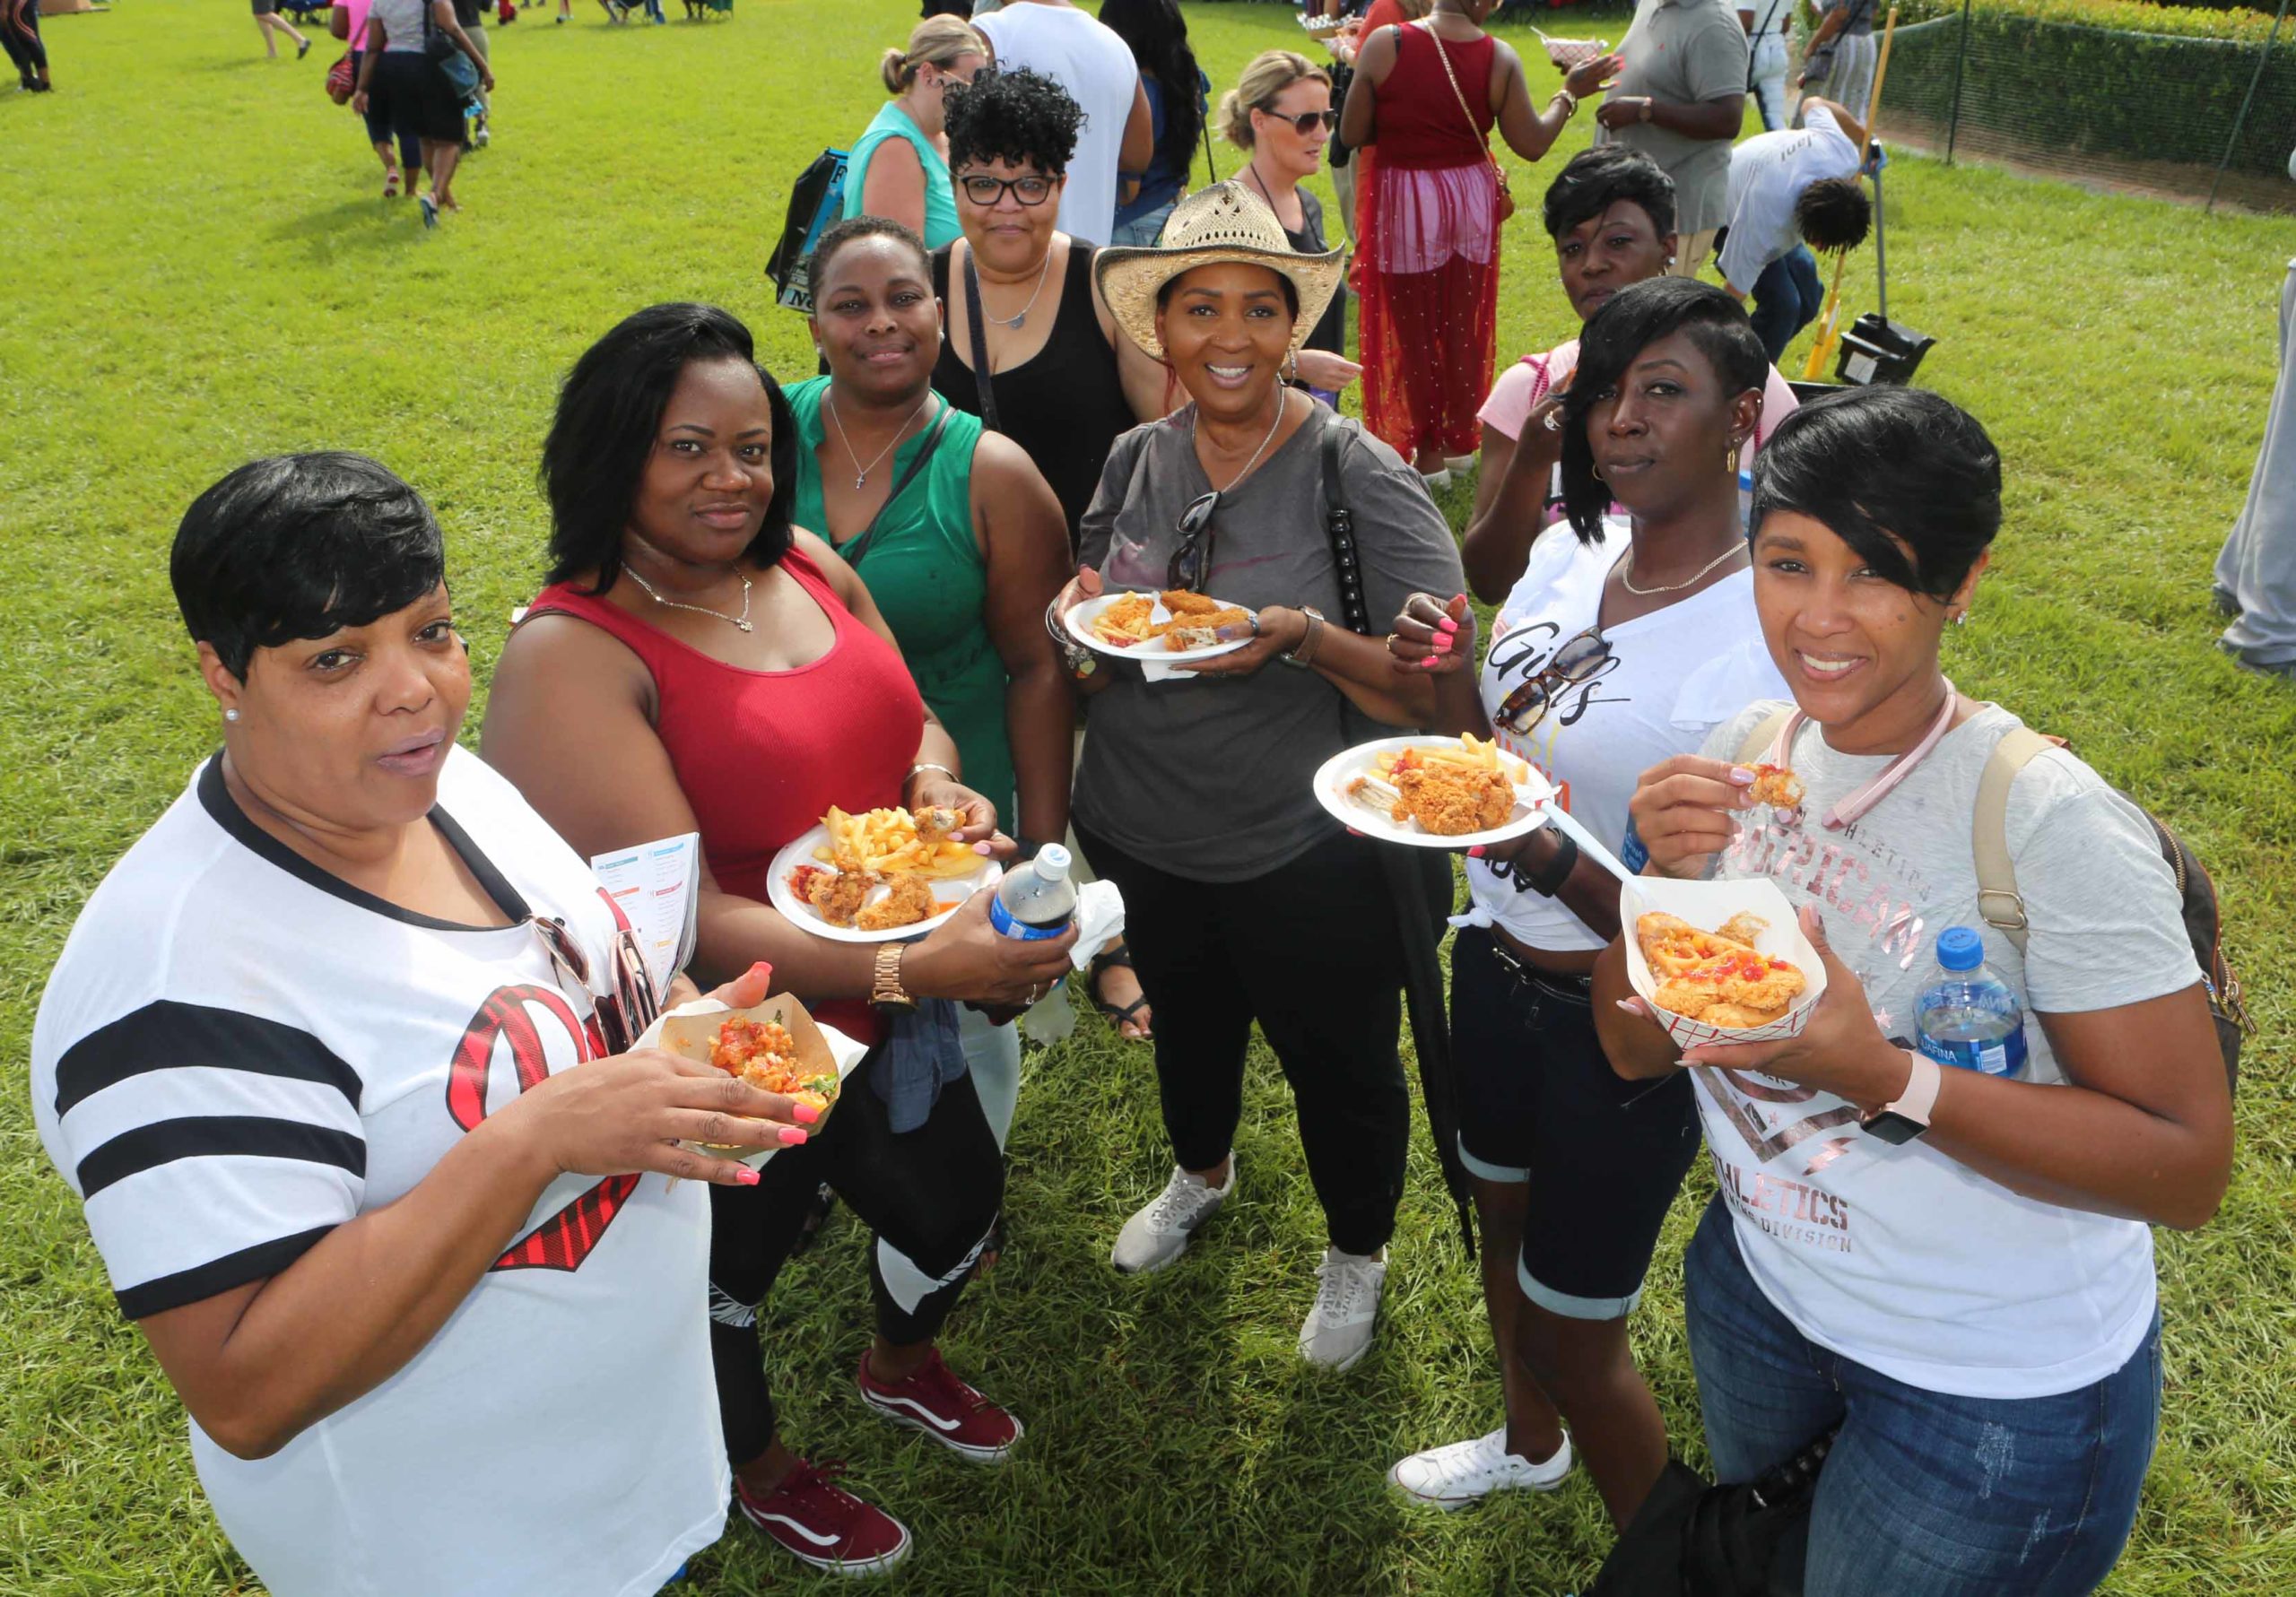 A group of ladies pose while eating some fried chicken during the National Fried Chicken Festival at Woldenberg Park in New Orleans on Saturday, September 22, 2018.  (Photo by Peter G. Forest)  Instagram:  @forestphoto_llc